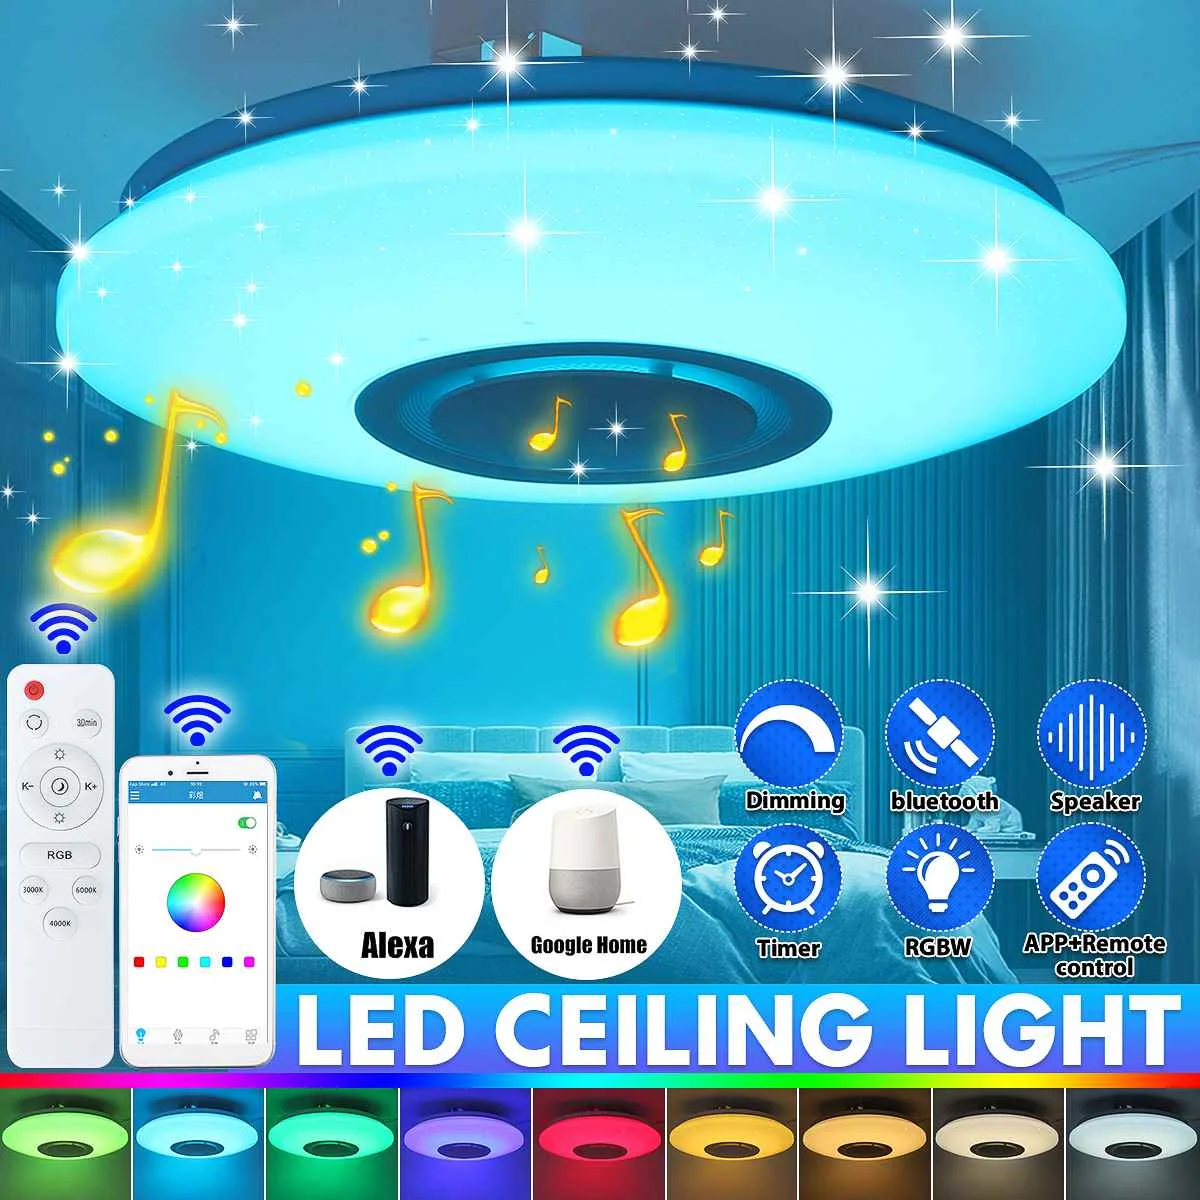 

300W WiFi Modern RGB LED Ceiling Light Phone APP Remote Control bluetooth Smart Music Lamp Dimmable Works with Alexa Google Home